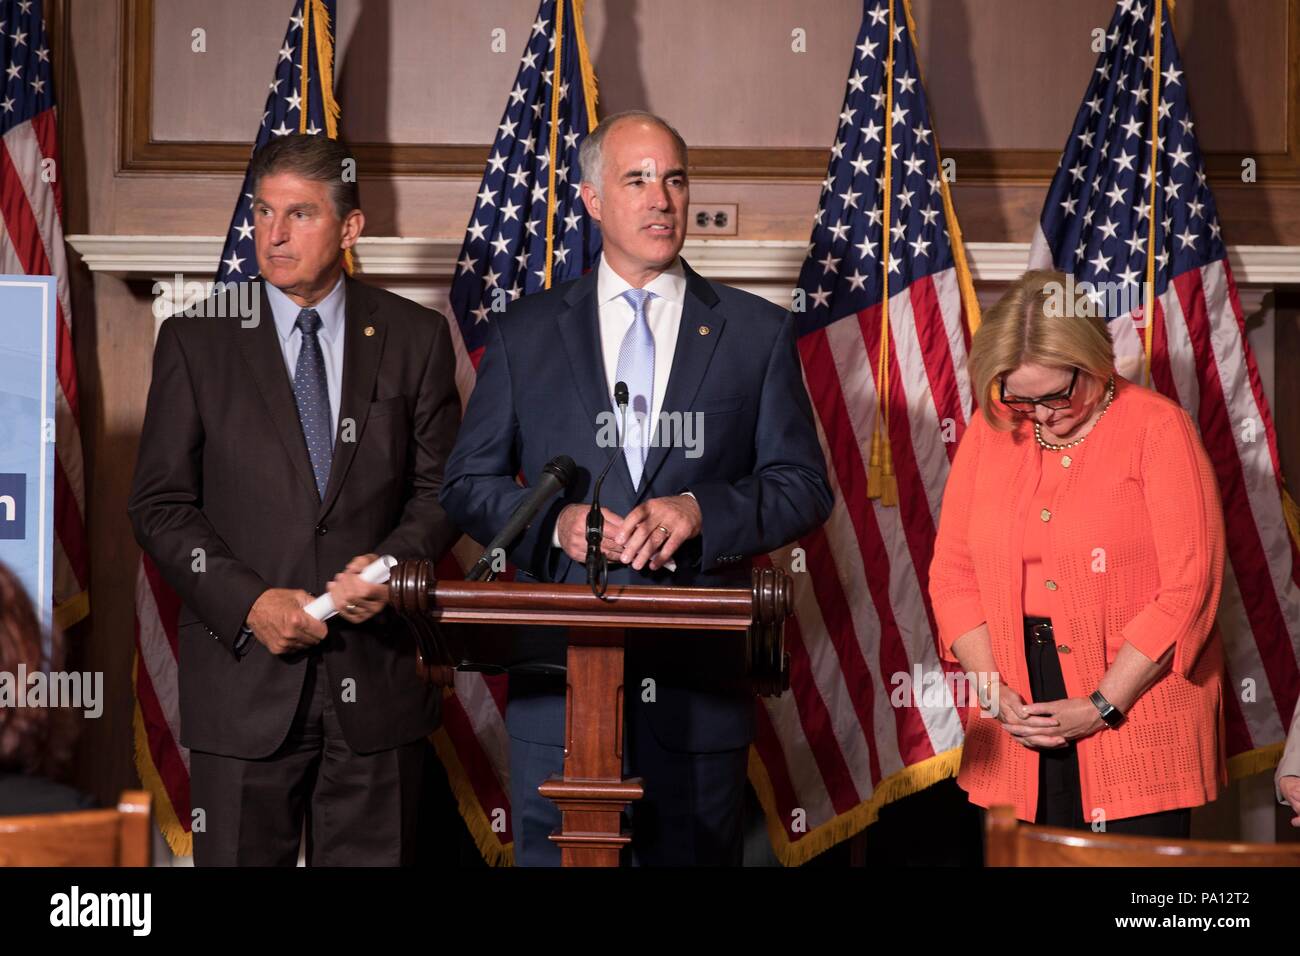 Washington DC, USA. 19th July, 2018. U.S. Senator Bob Casey of Pennsylvania, joined by fellow democrats, calls for protecting pre-existing conditions in health insurance policies during a news conference on Capitol Hill July 19, 2018 in Washington, D.C. Standing from left to right are: Sen. Joe Manchin, Sen. Bob Casey, and Sen. Claire McCaskill. Credit: Planetpix/Alamy Live News Stock Photo